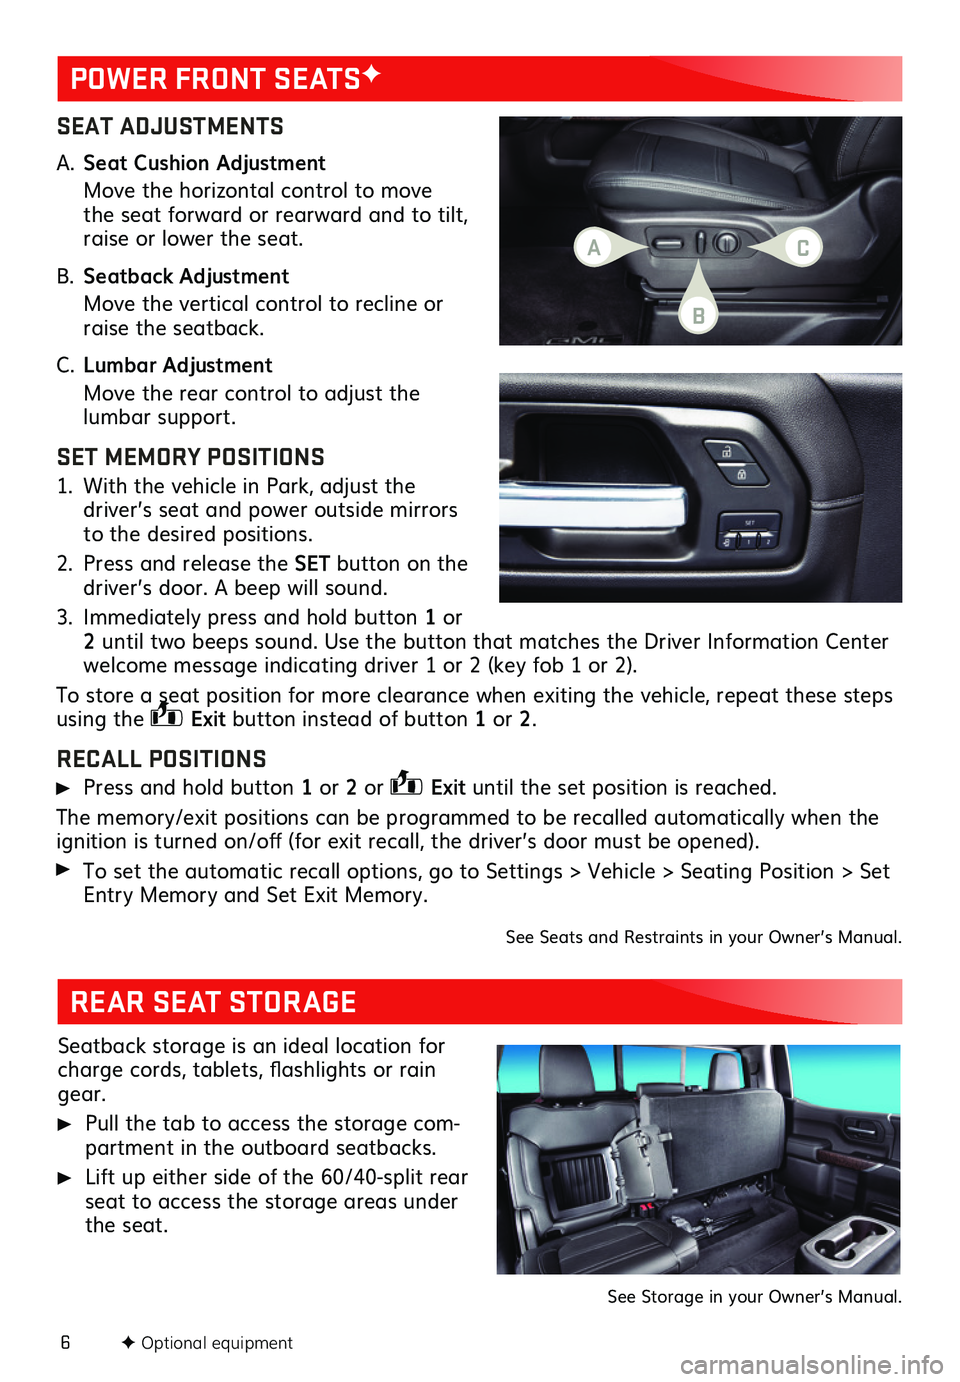 GMC SIERRA 2019  Get To Know Guide 6
SEAT ADJUSTMENTS
A. Seat Cushion Adjustment
  Move the horizontal control to move the seat forward or rearward and to tilt, raise or lower the seat.
B. Seatback Adjustment
  Move the vertical contro